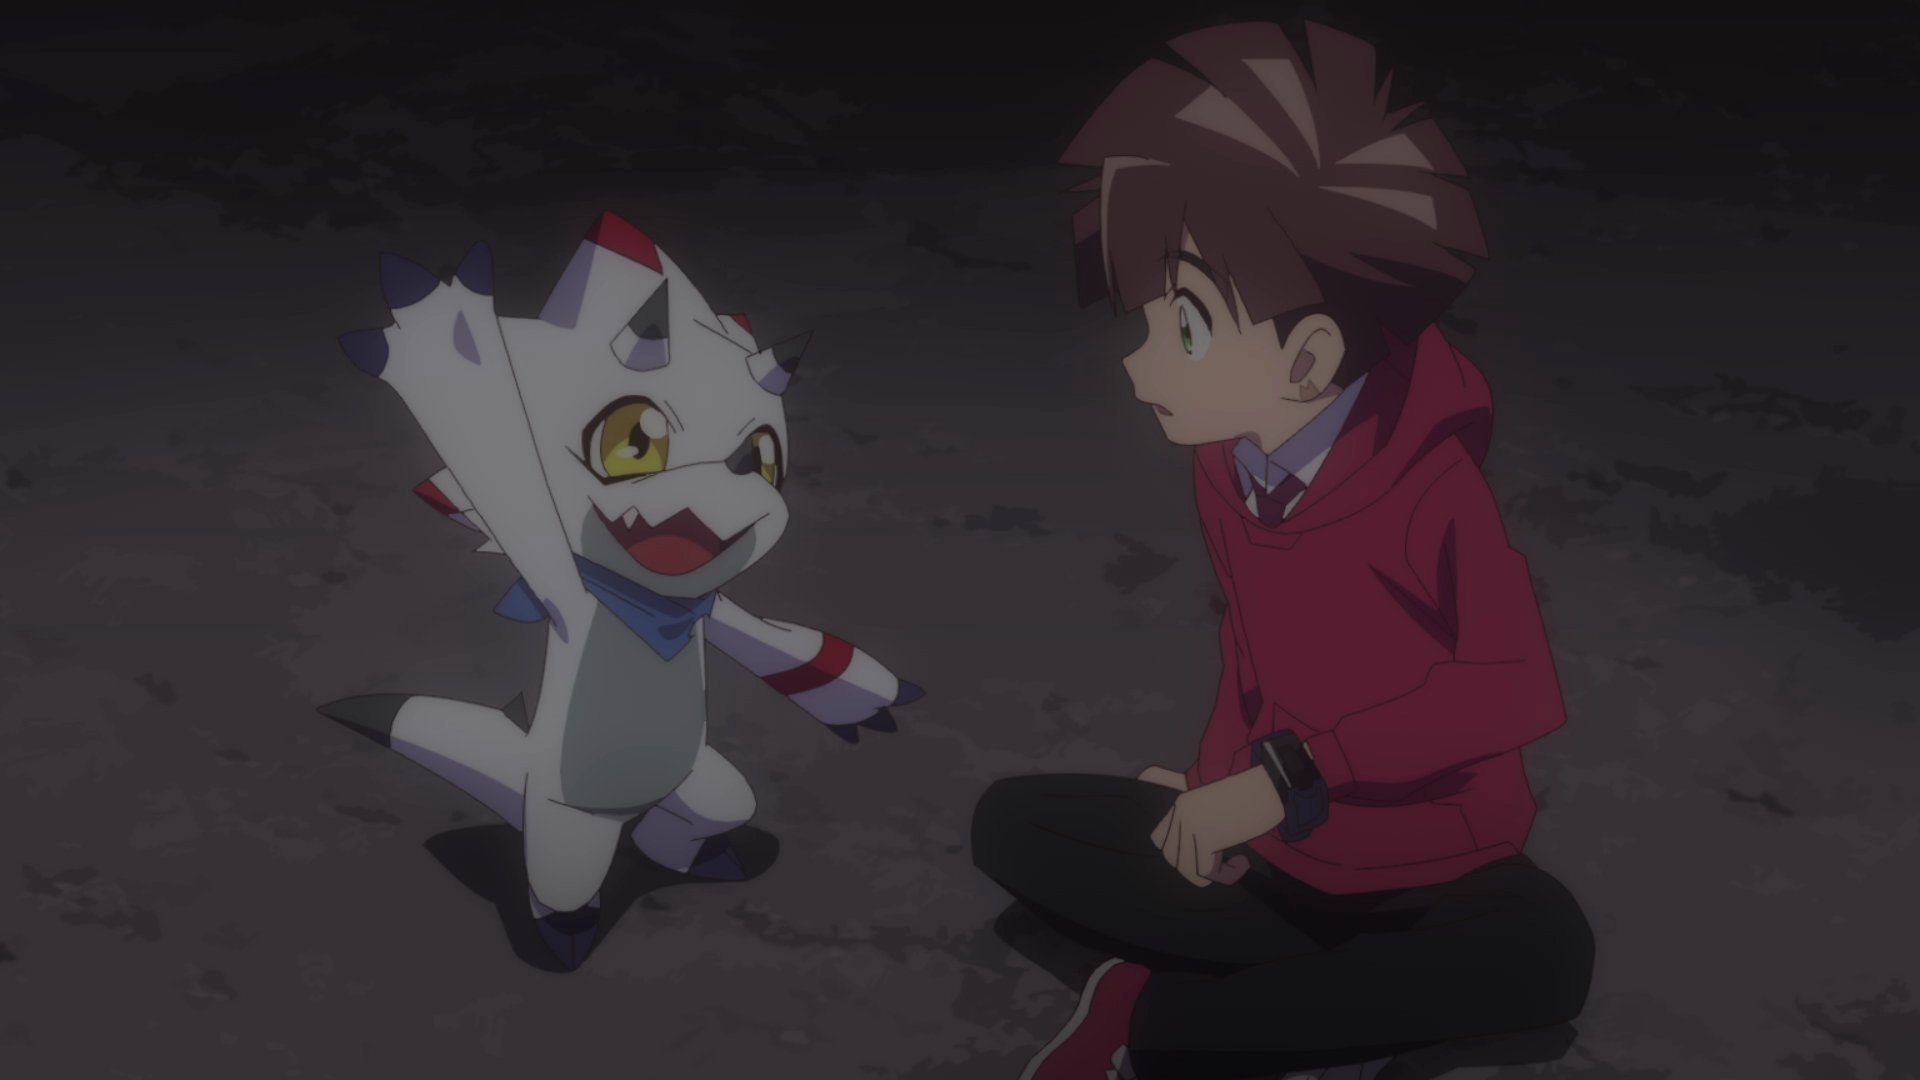 Digimon Ghost Game Episode 67 Final Episode Social Art (Lots of it